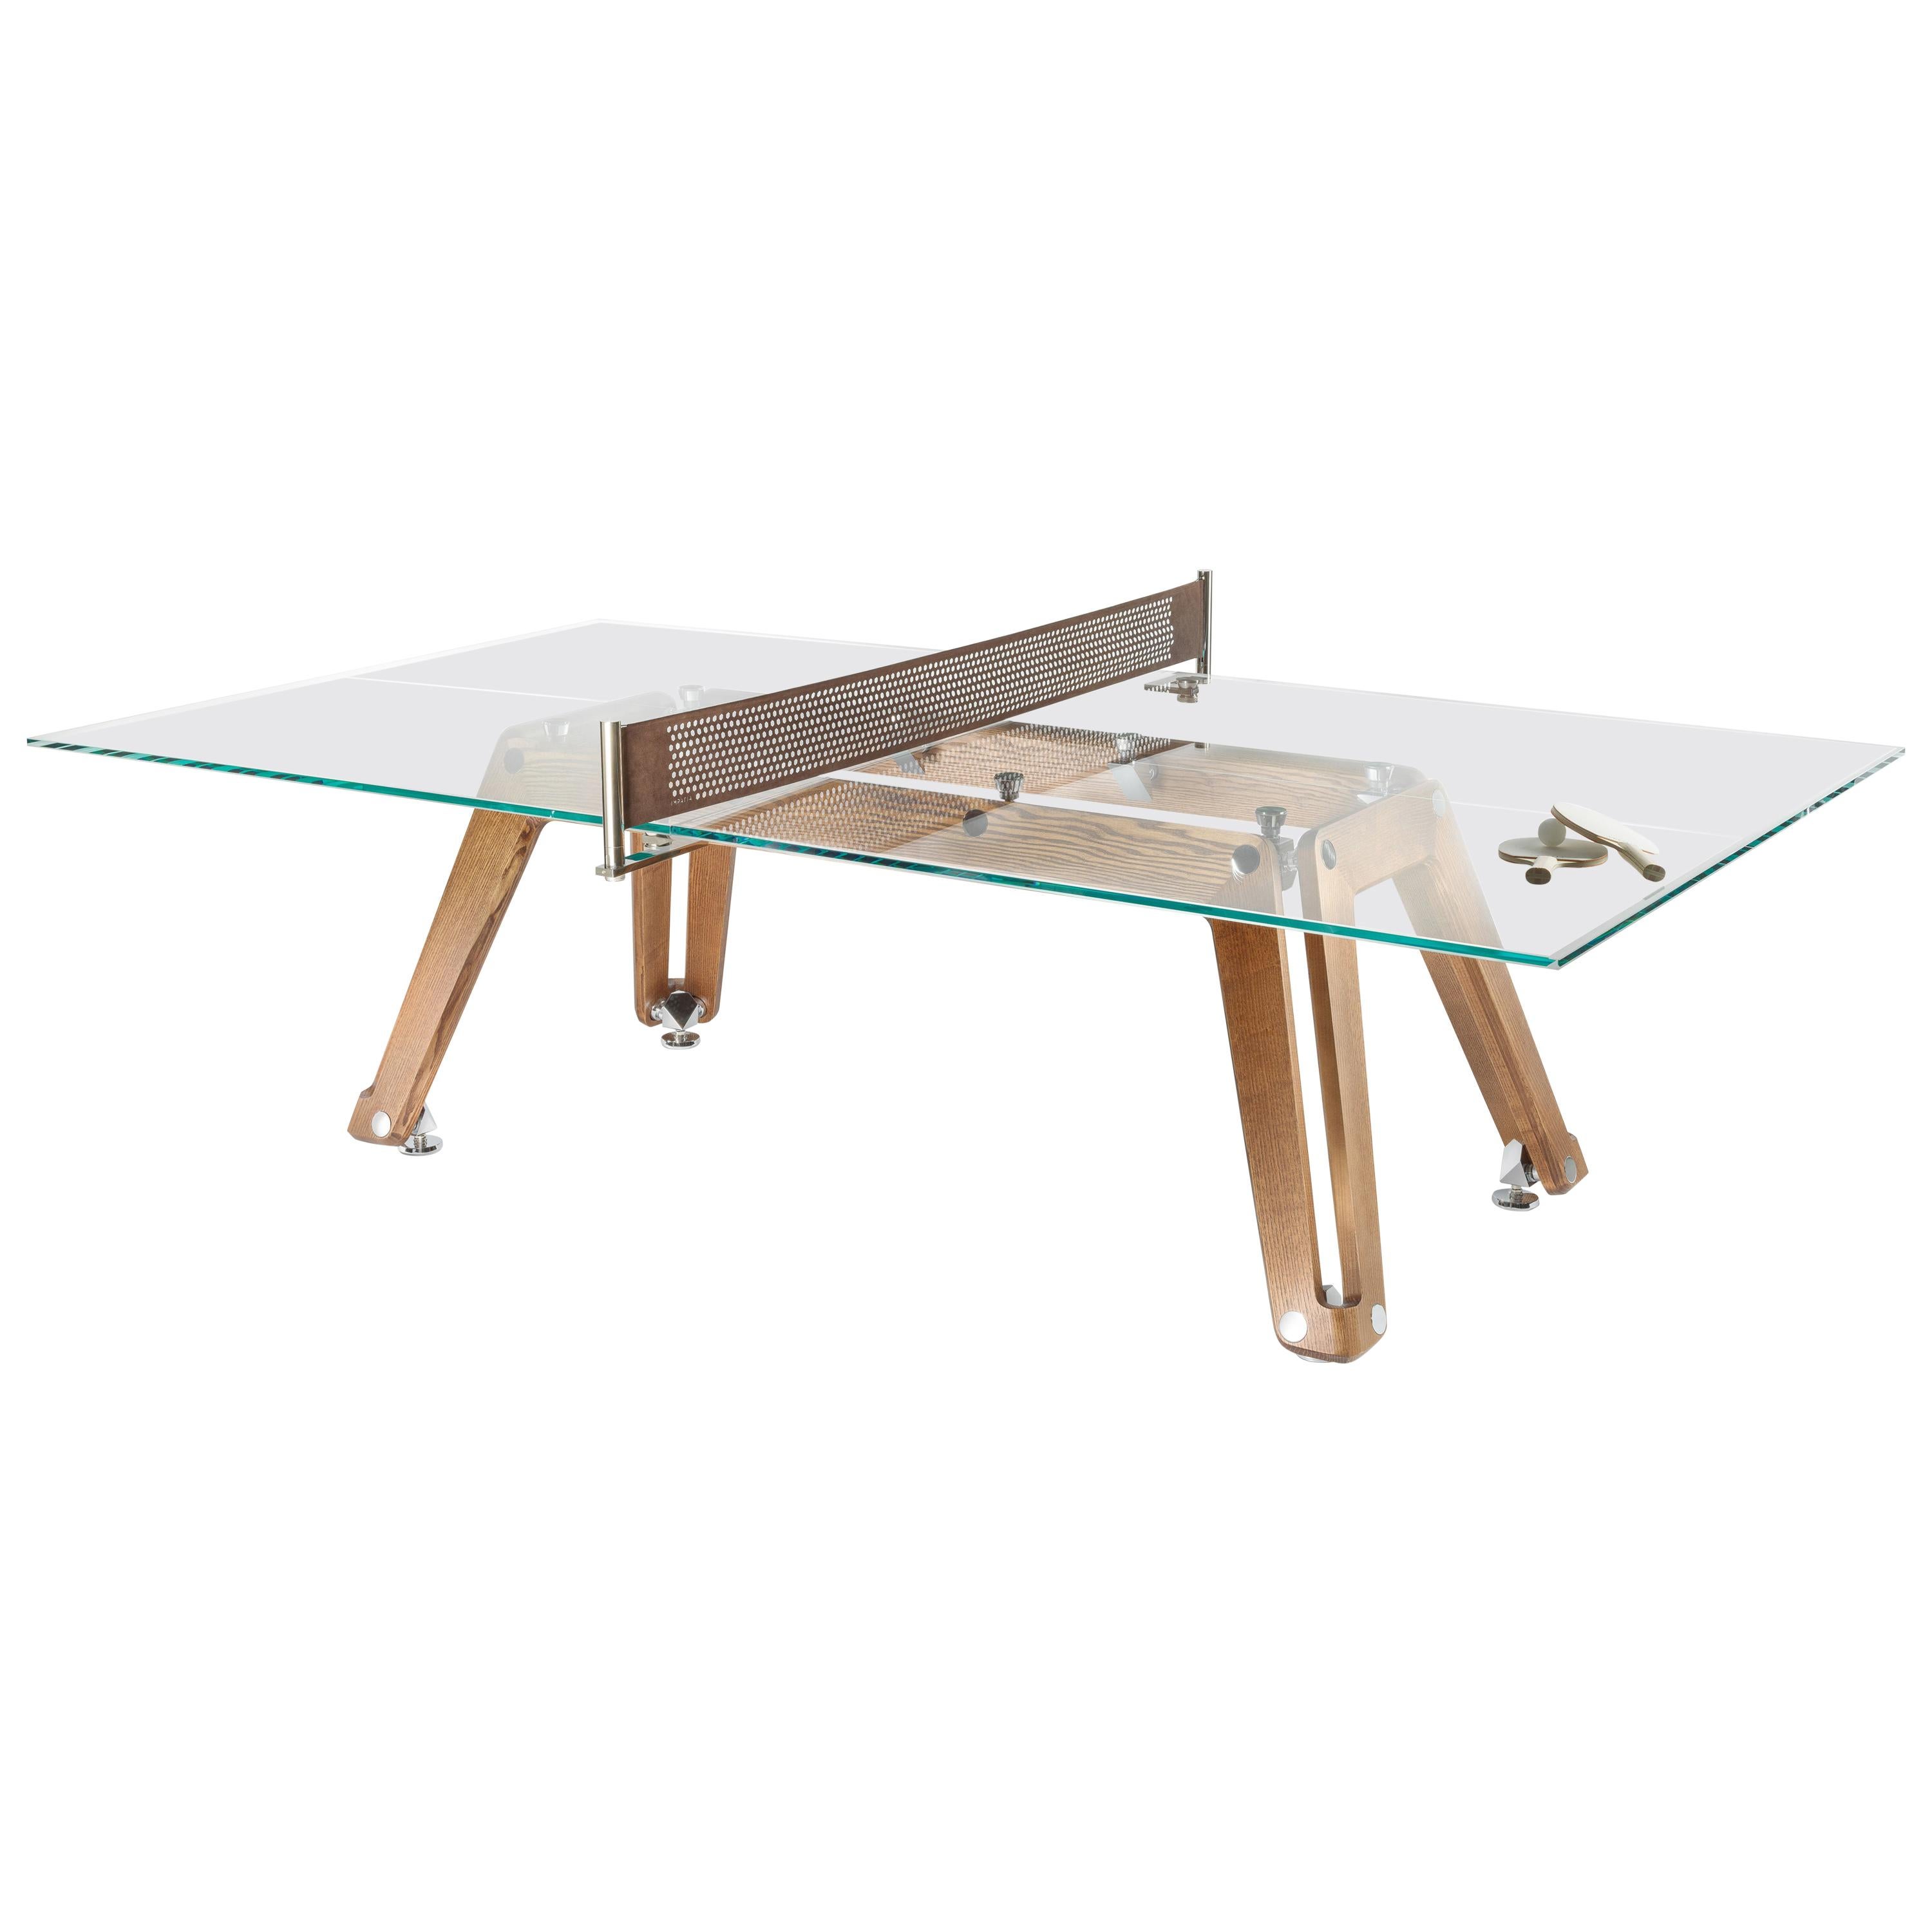 Modern Glass and Wood Ping Pong Table by Impatia